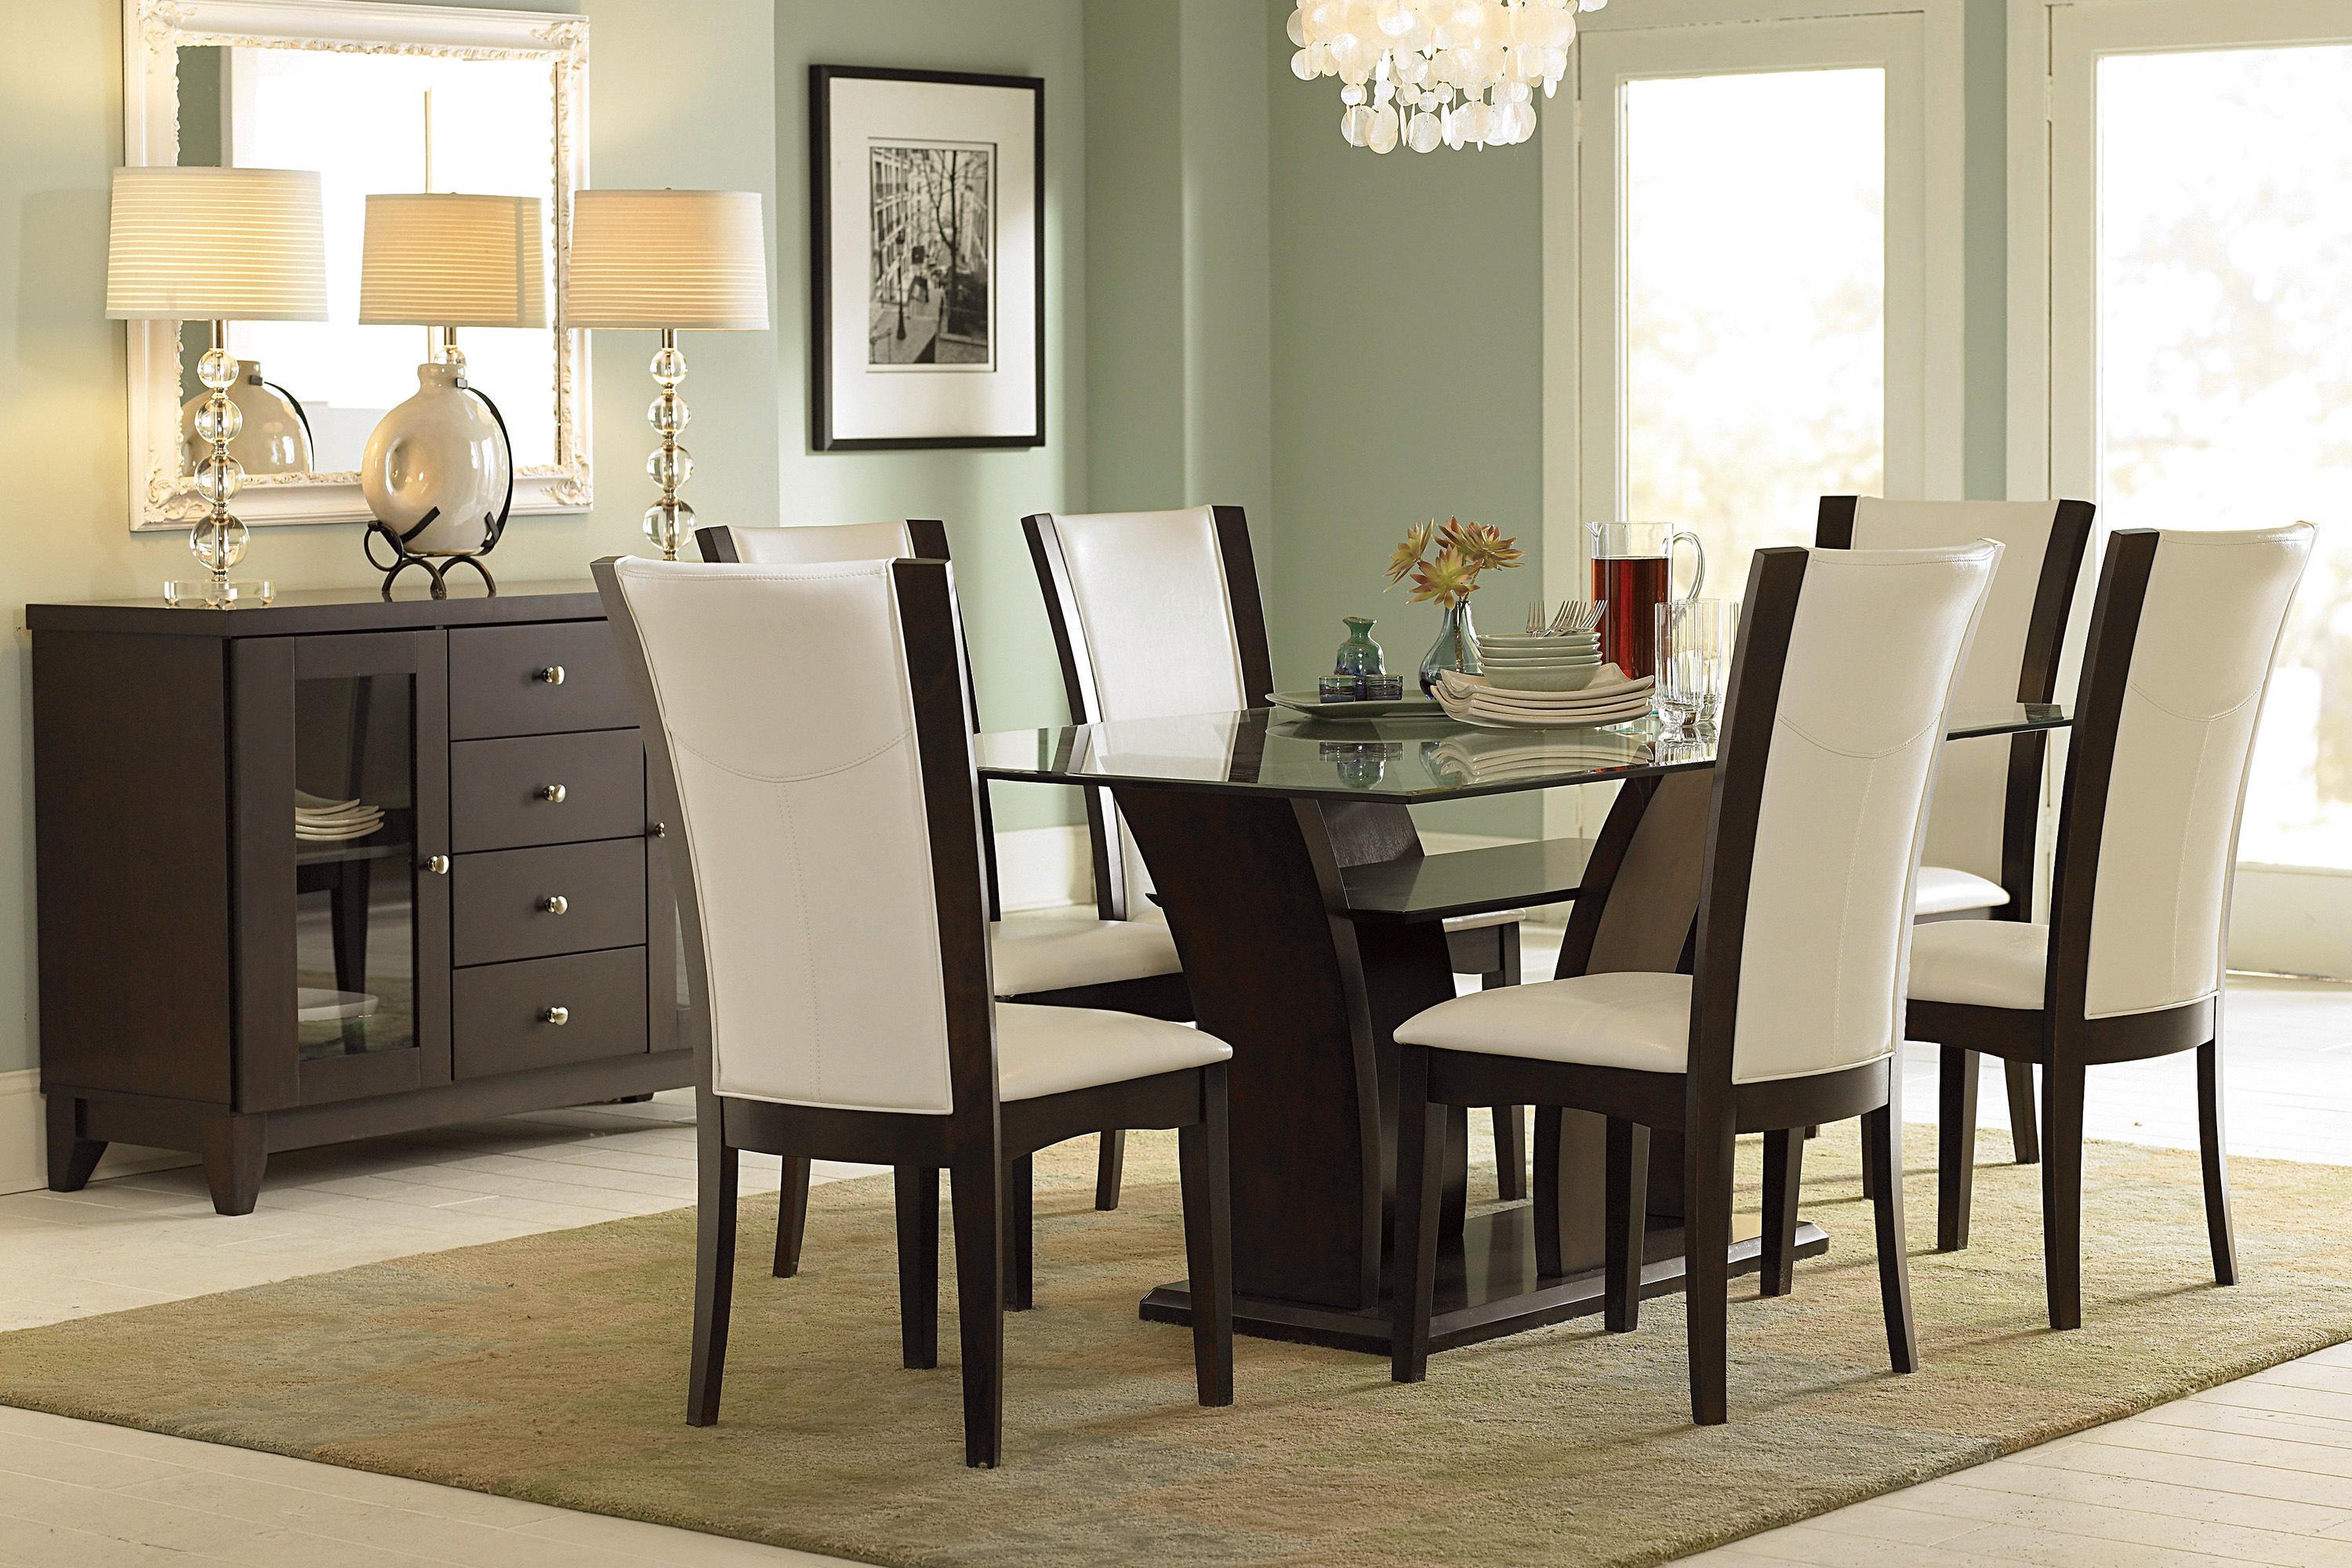 Contemporary Dining Room Set 710-72-W-5PC Daisy 710-72-W-5PC in Espresso, White Faux Leather